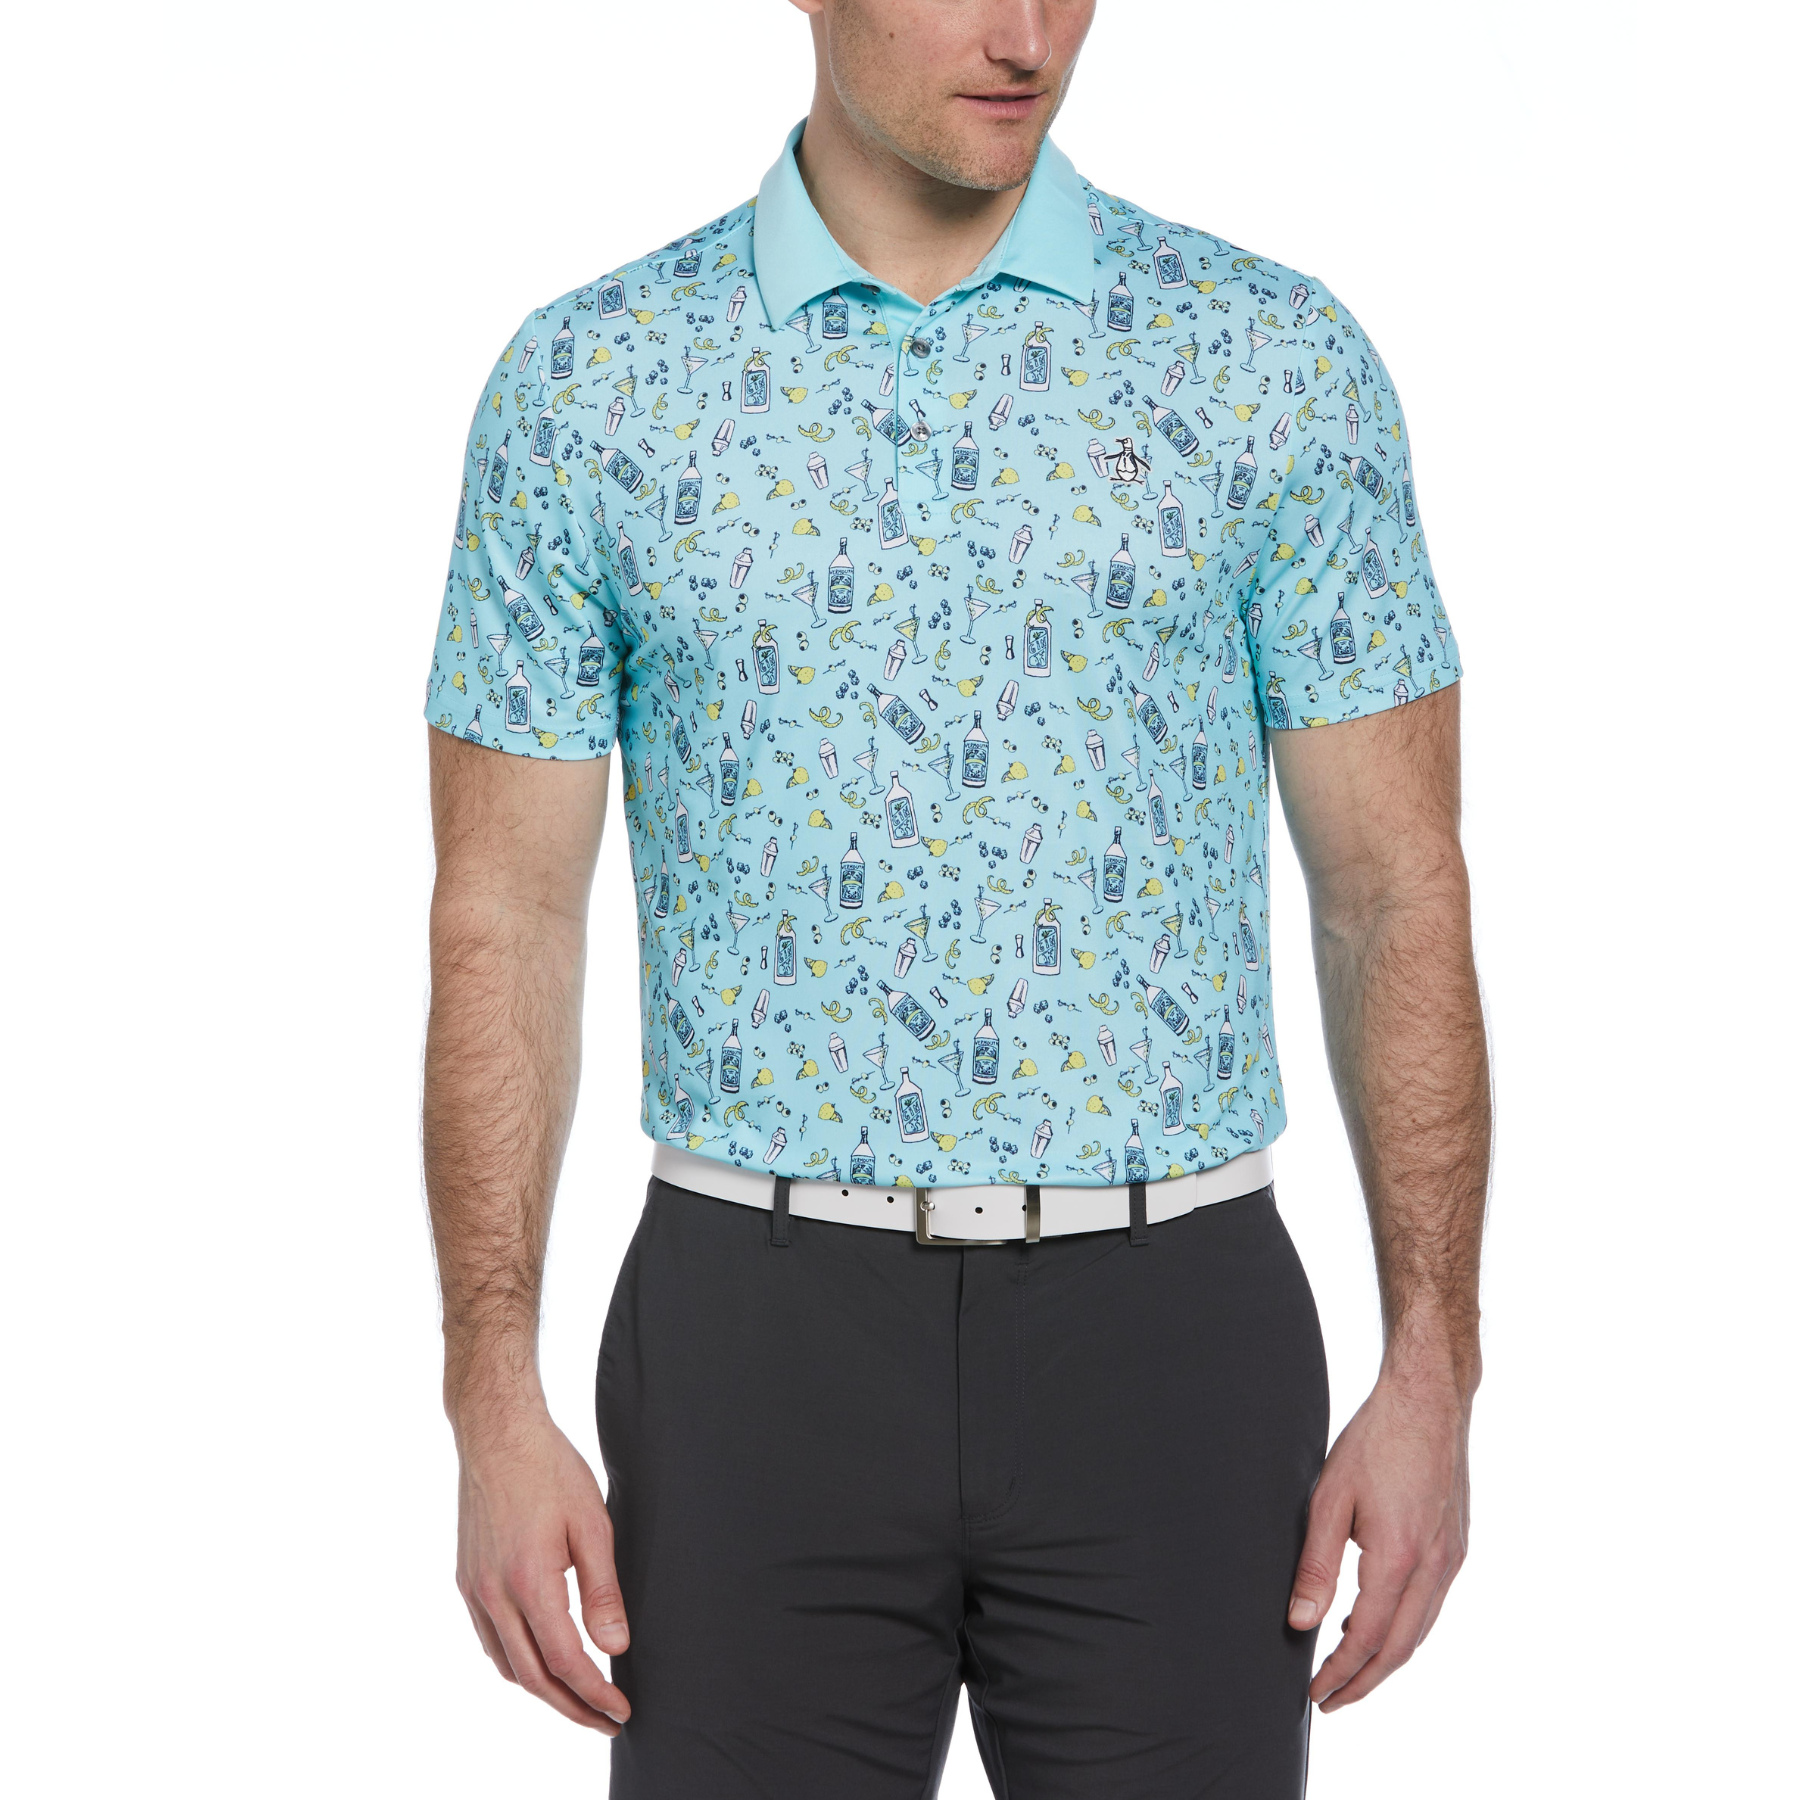 View Novelty Martini Print Golf Polo Shirt In Tanager Turquoise information